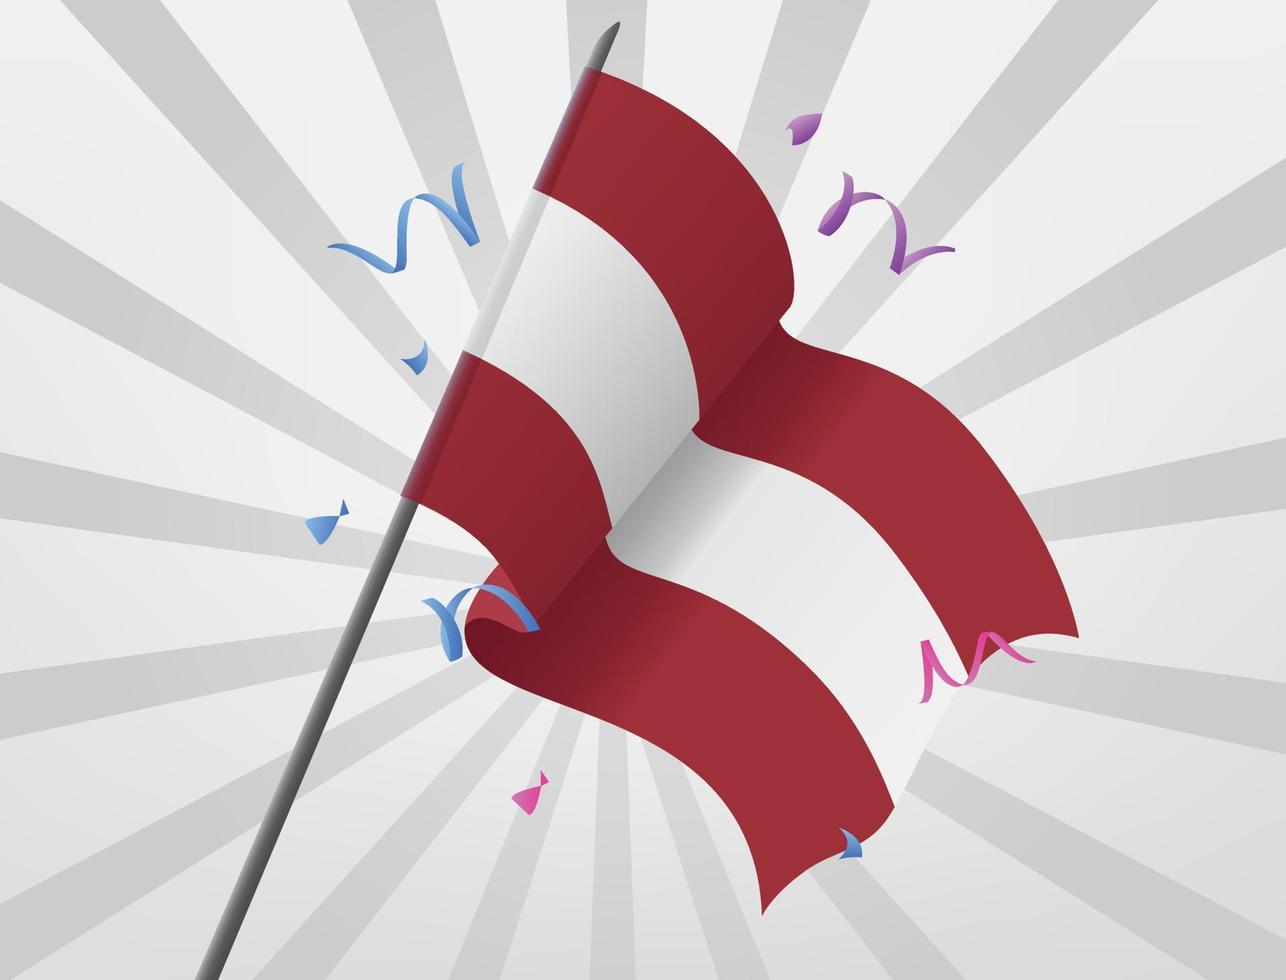 The celebratory flag of Latvia is flying at high altitudes vector